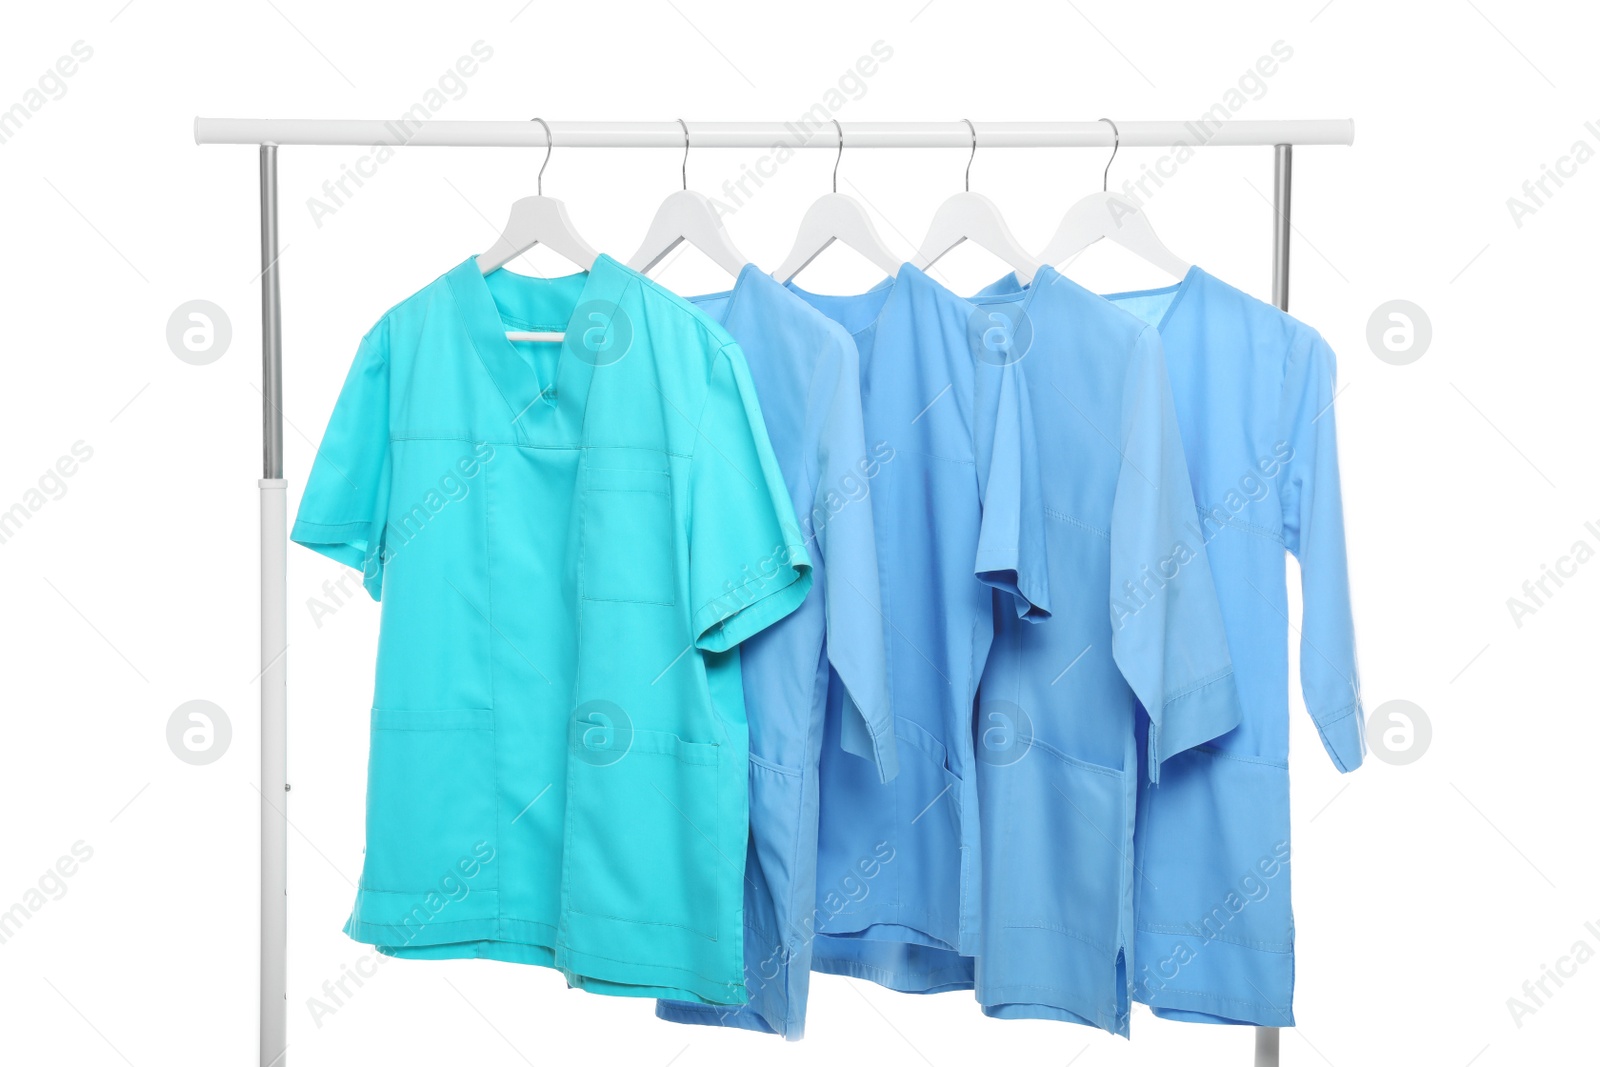 Photo of Turquoise and light blue medical uniforms on rack against white background